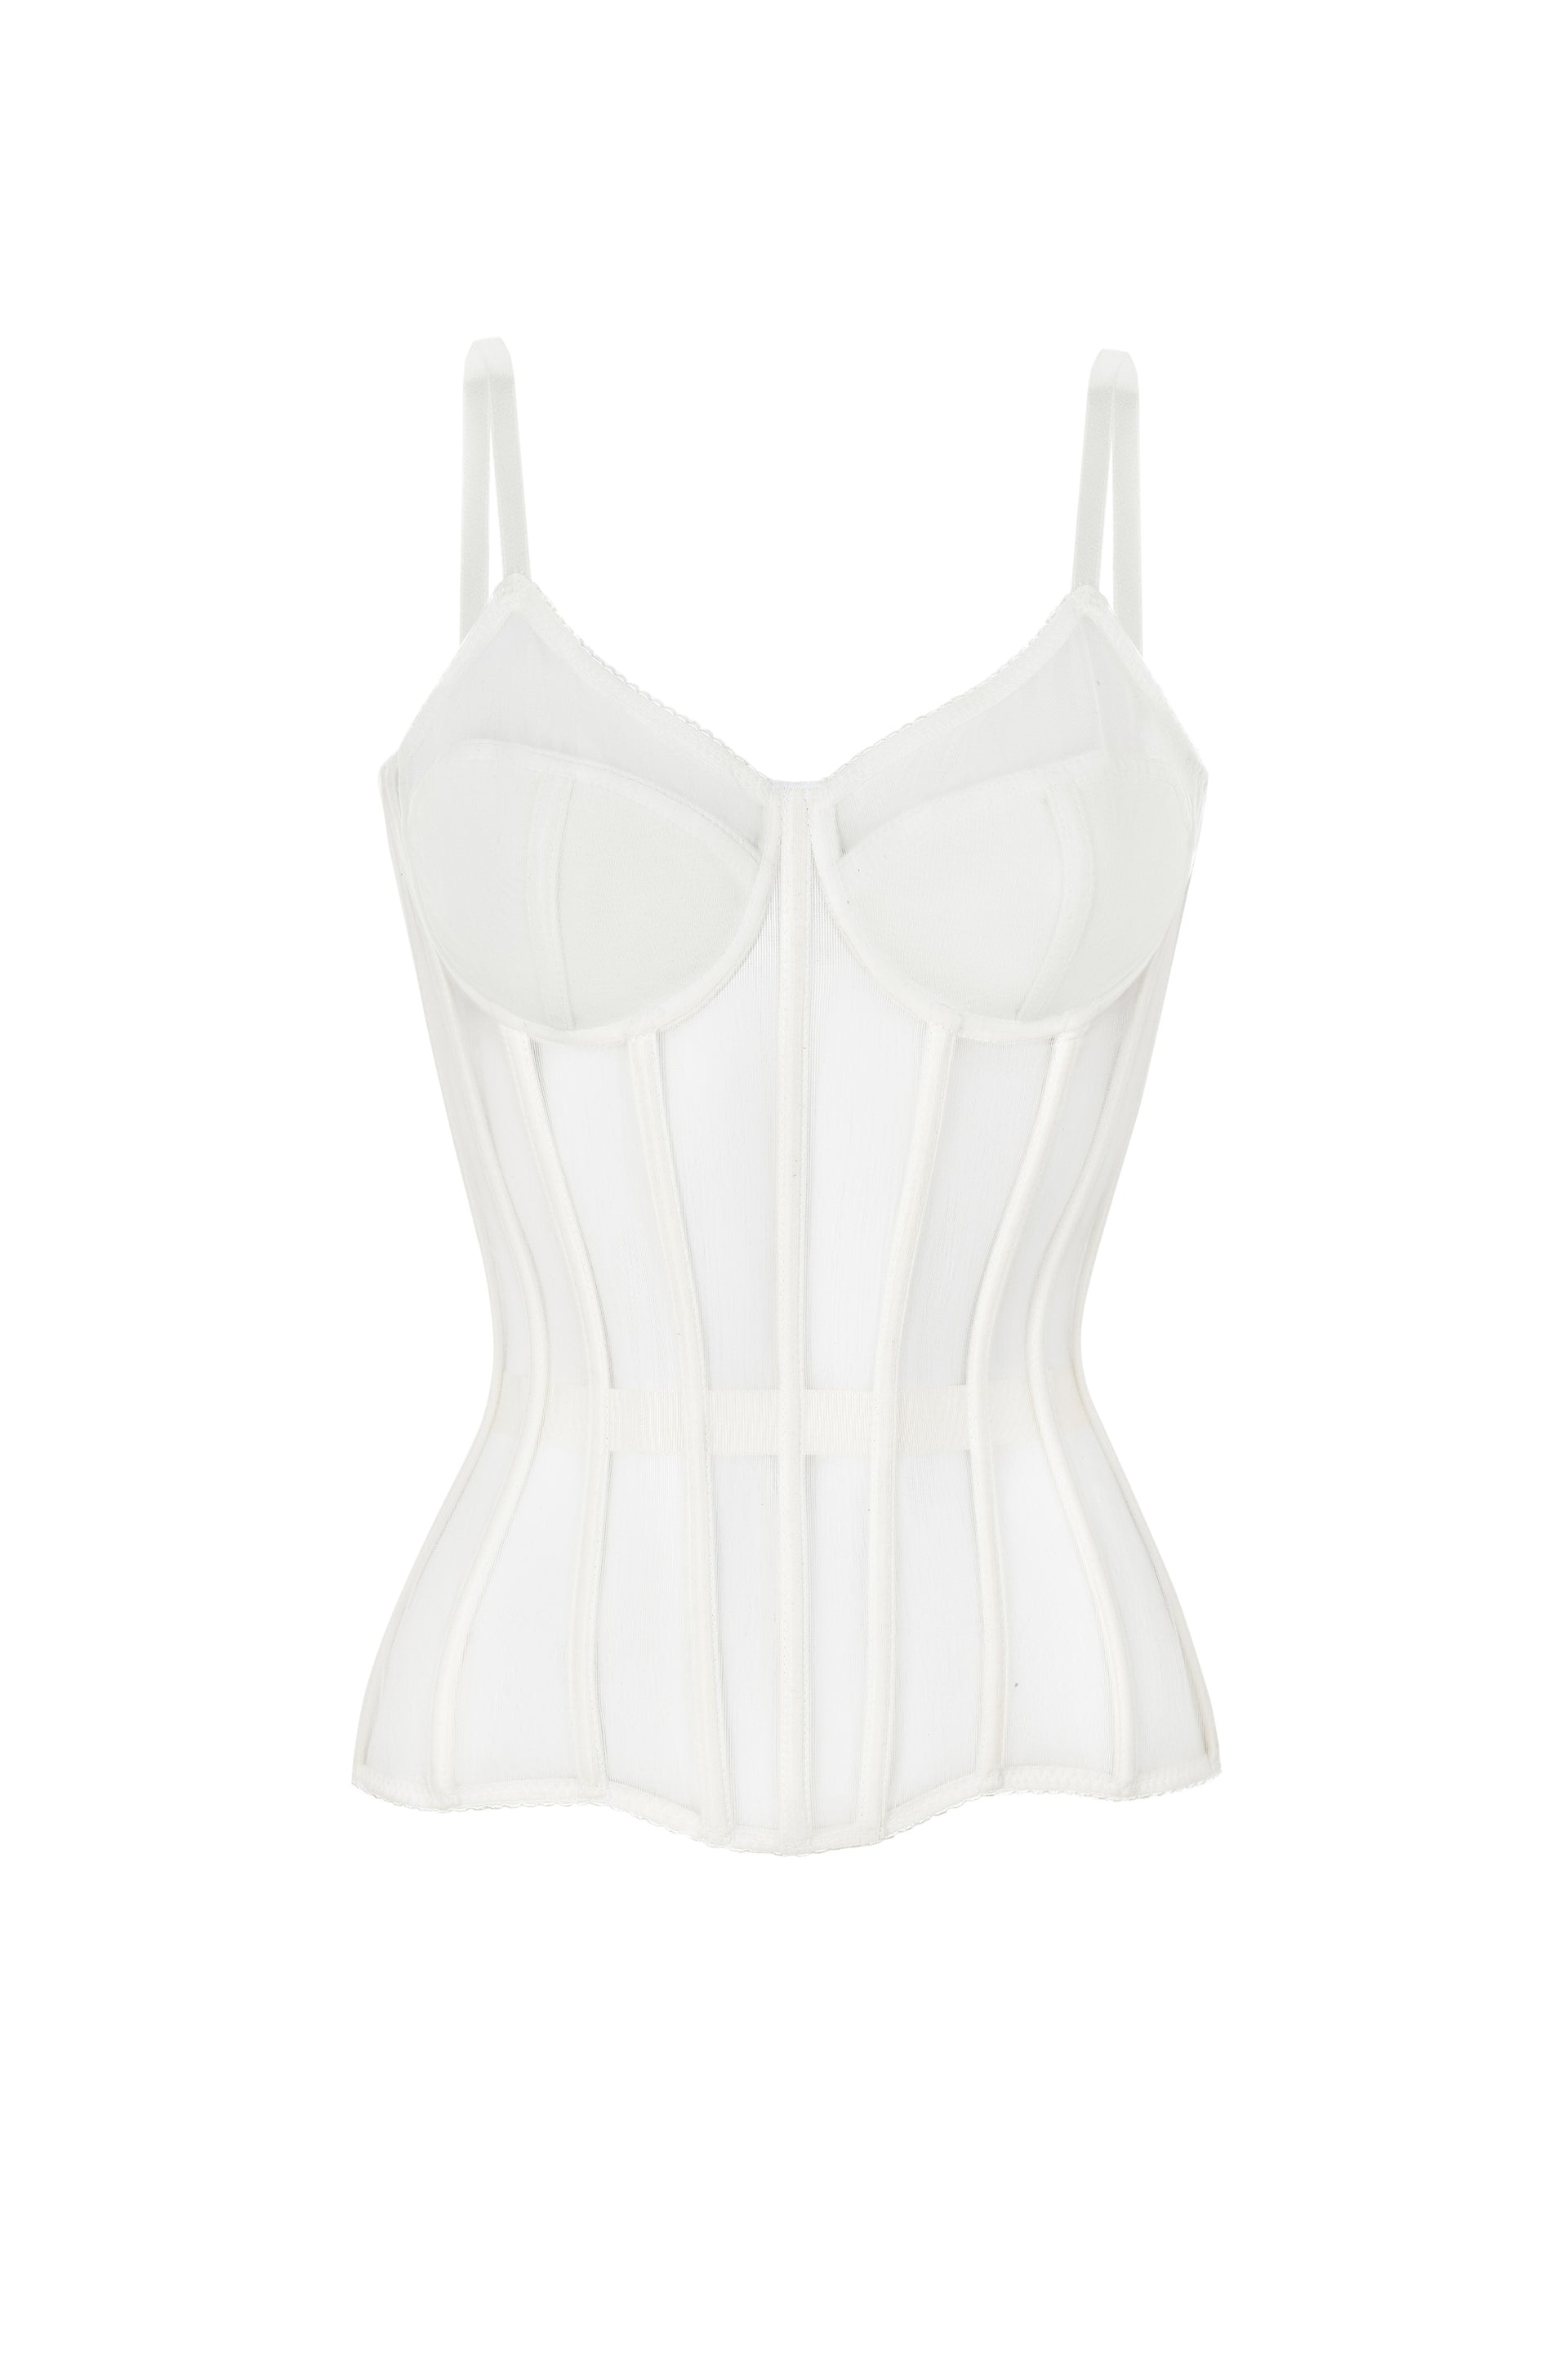 Off white corset with transparent cups